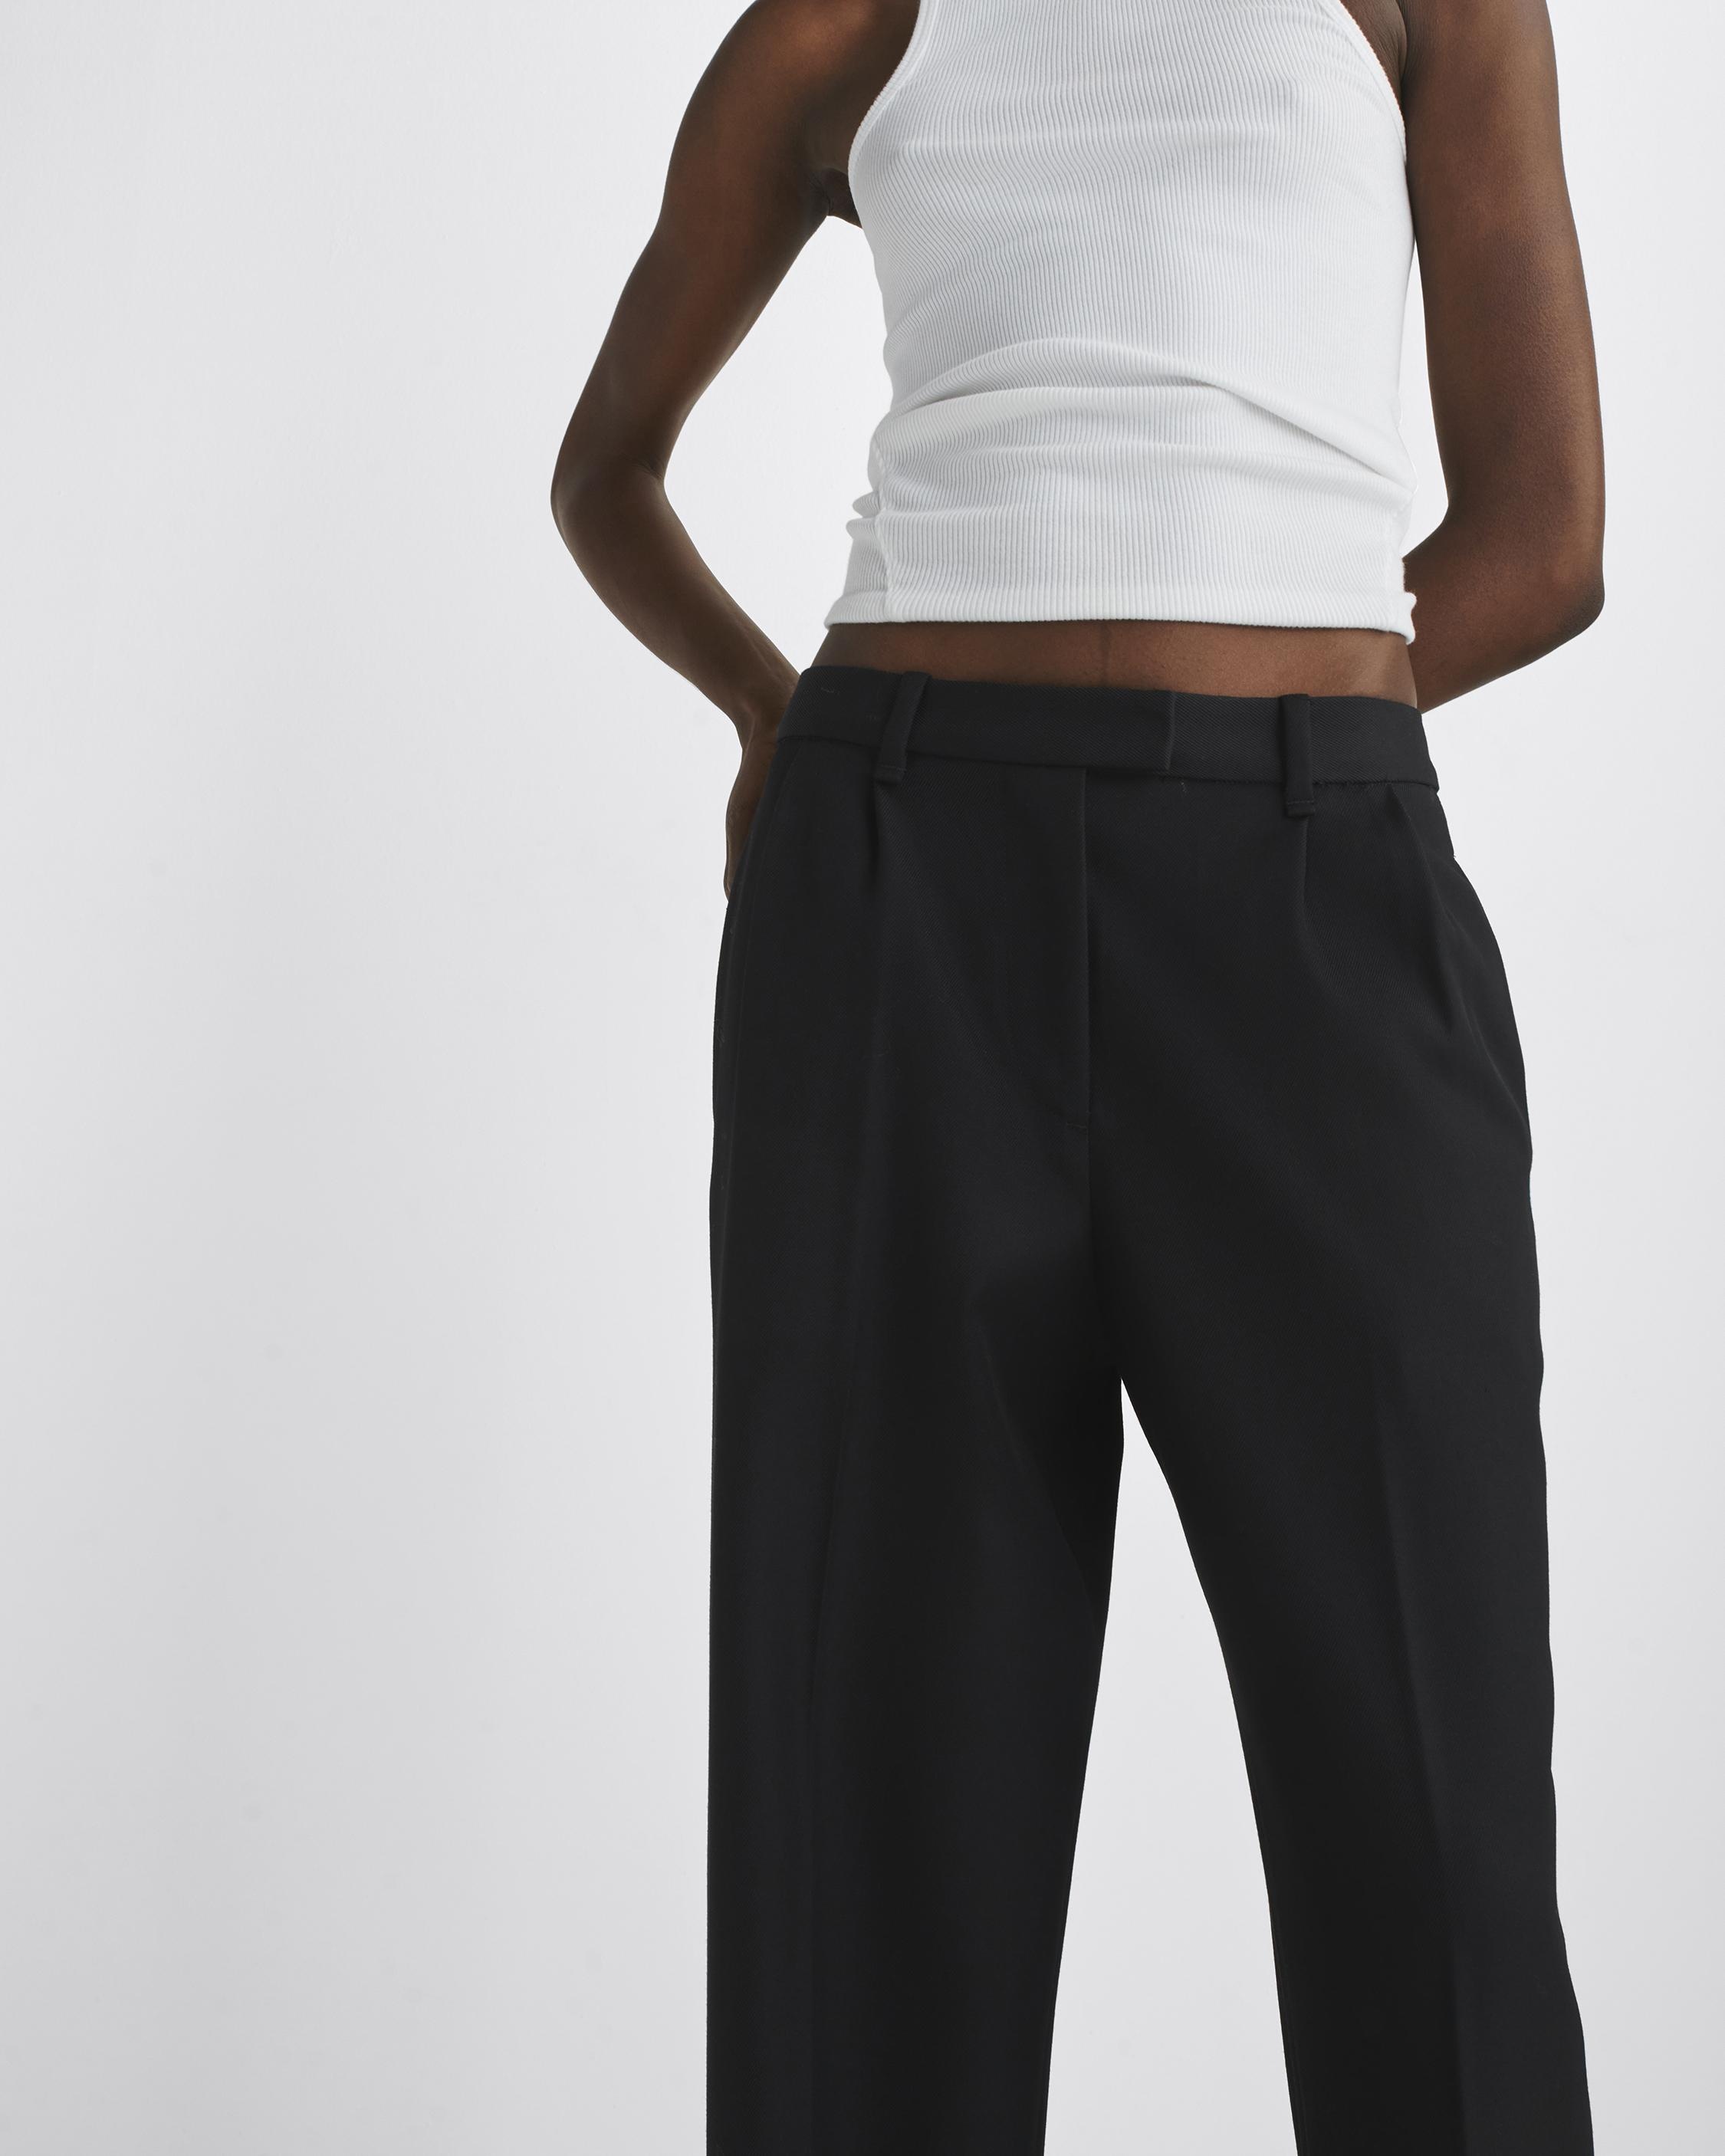 Marianne Italian Wool Pant
Relaxed Fit - 6